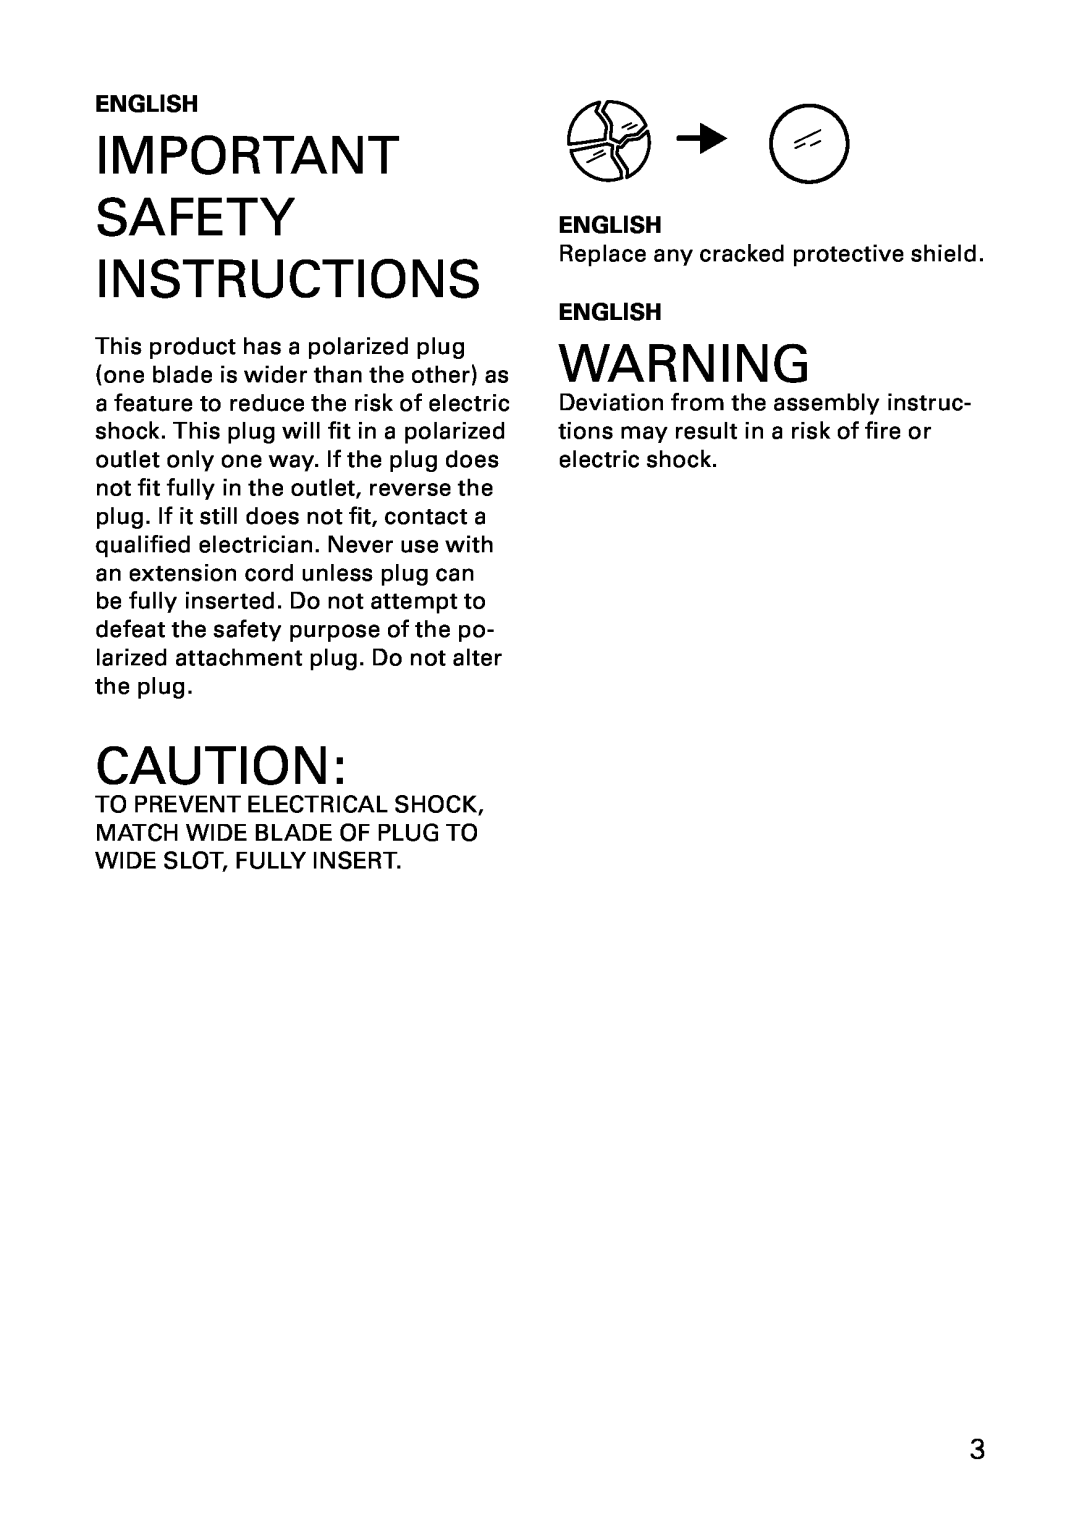 IKEA AA-297407-3, AA-297408-3 manual Important Safety Instructions, English, Replace any cracked protective shield 